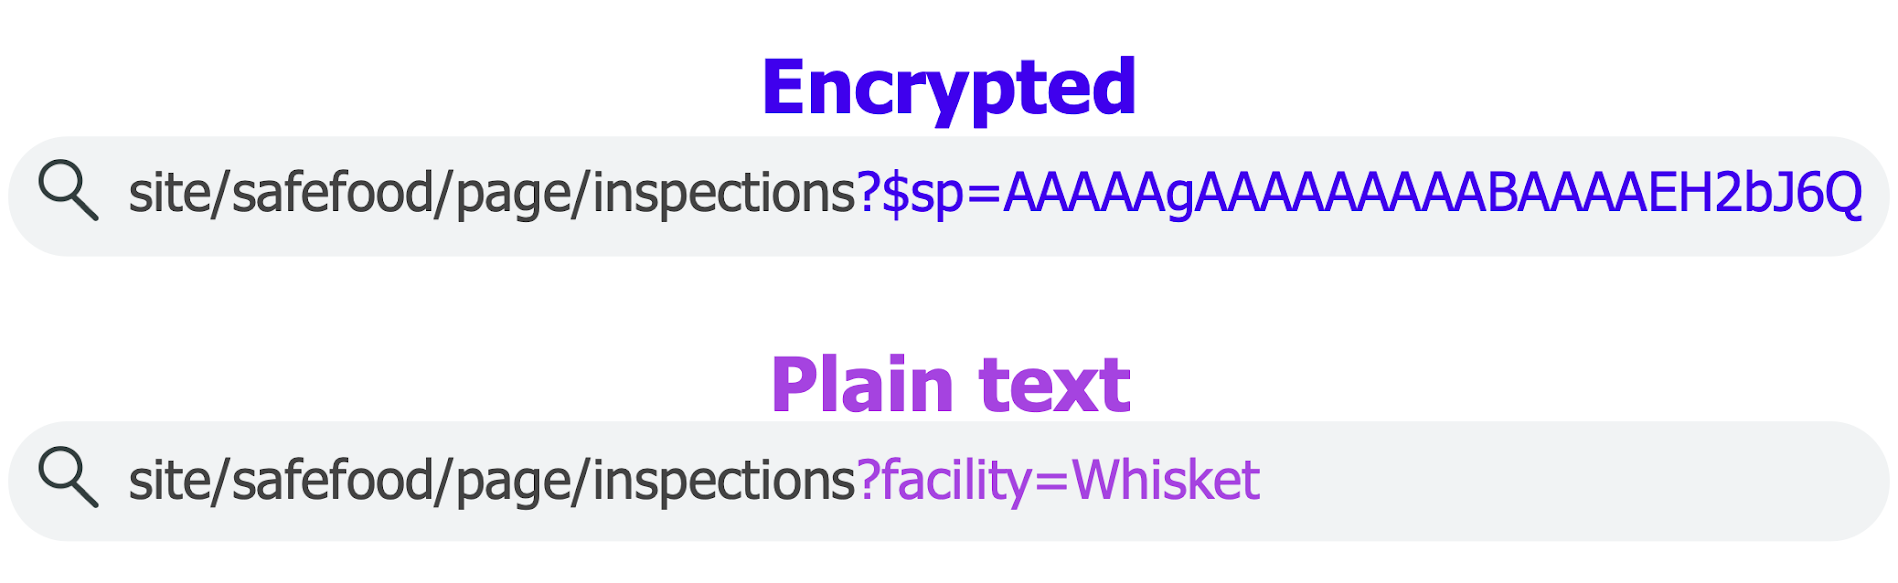 image comparing an encrypted URL and a plain text URL